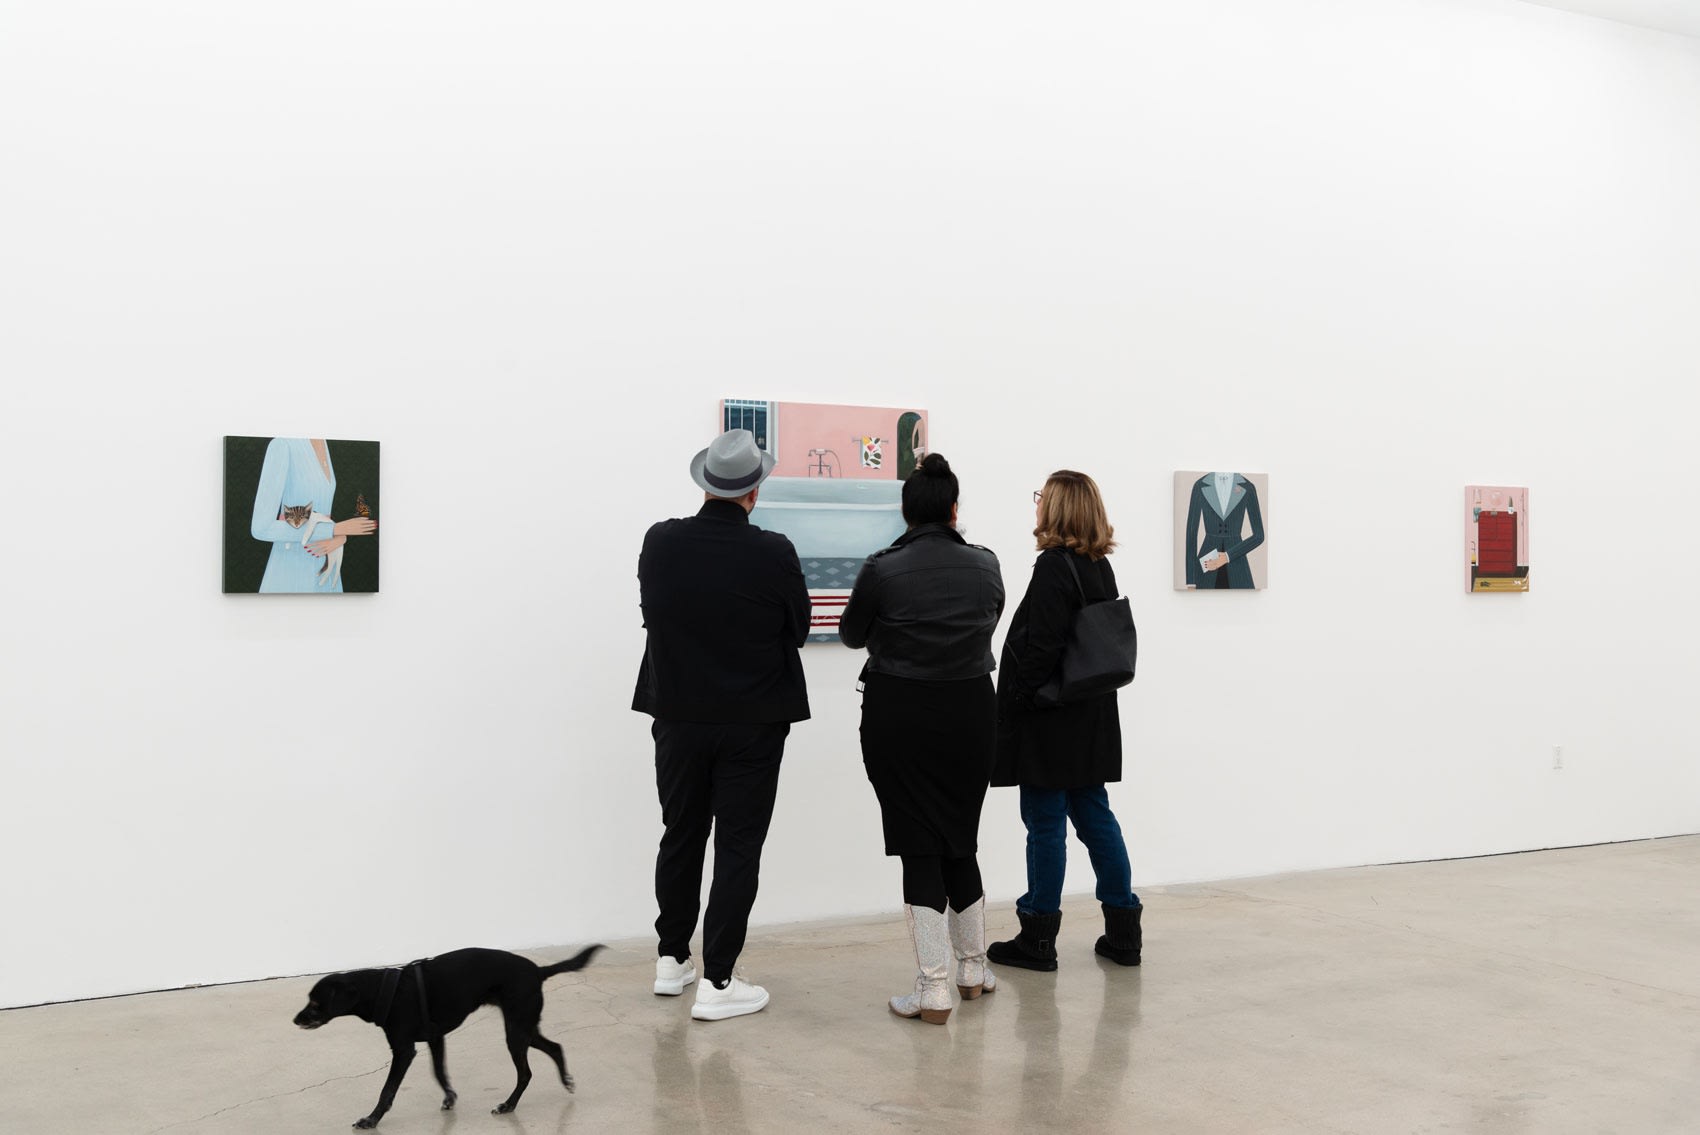 Three people stand up close looking at one of Angela Burson's paintings in an art gallery with white walls, while a small black dog runs away in the bottom left corner. 